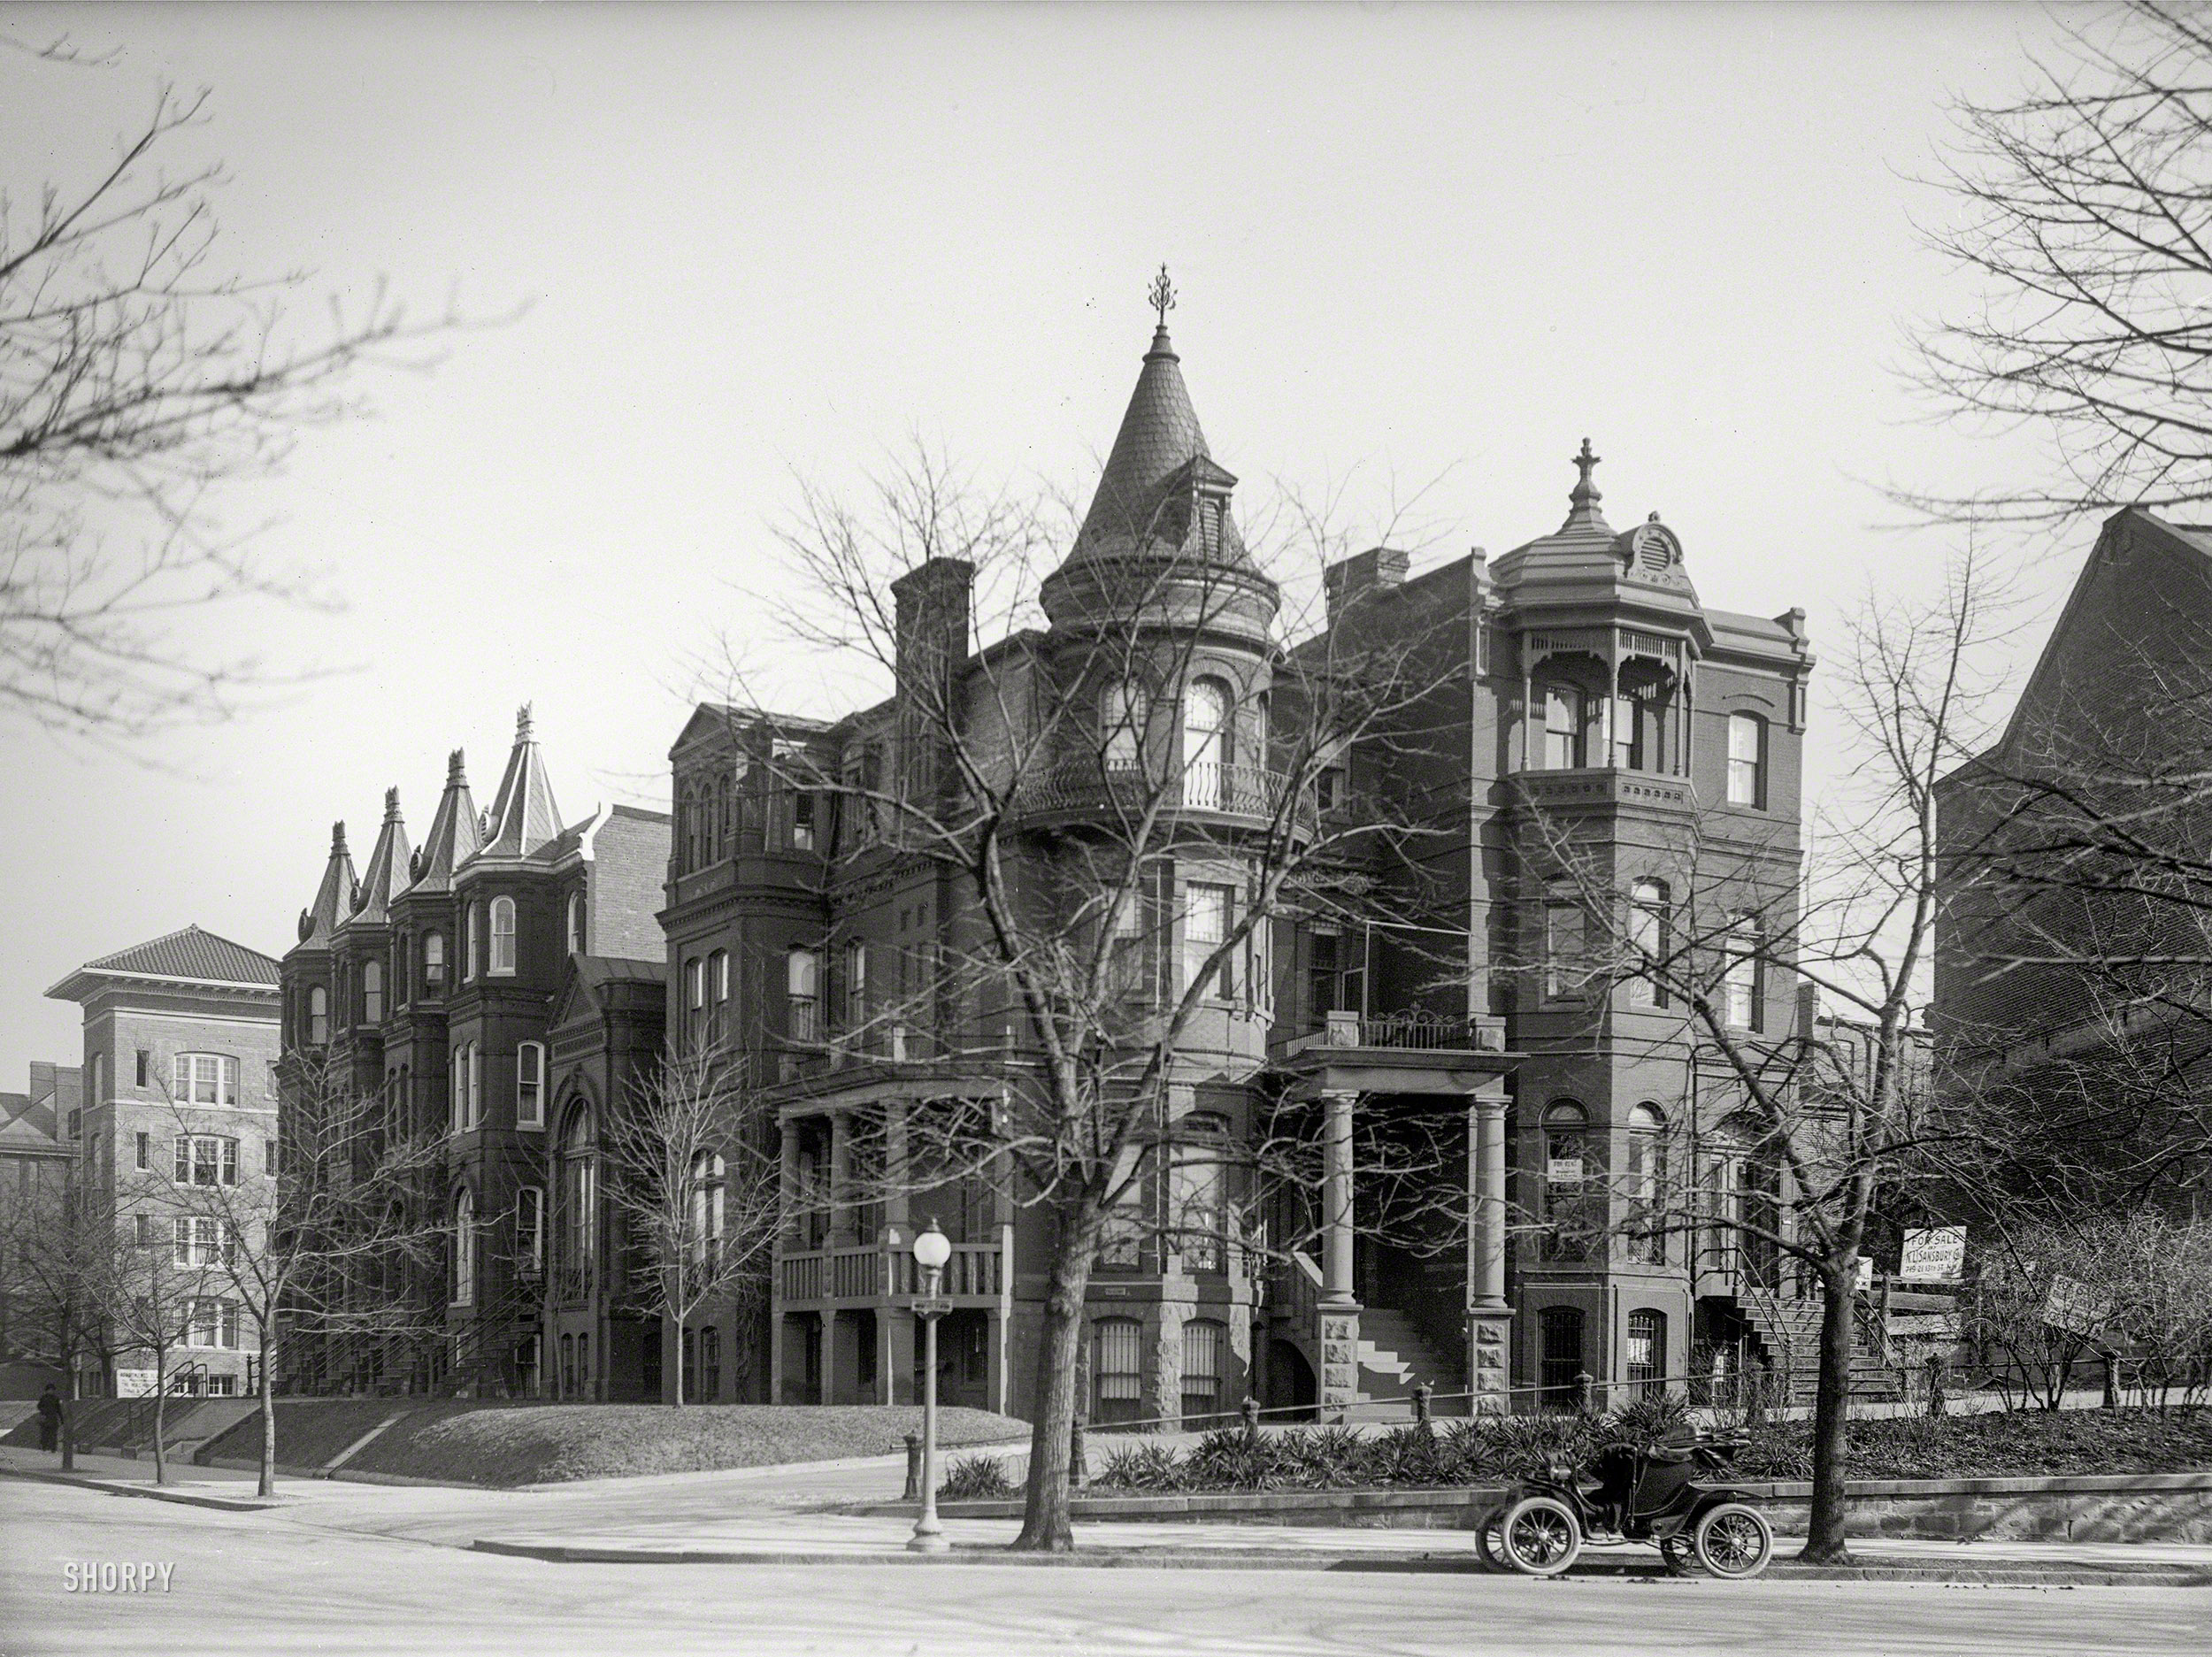 Washington, D.C., 1915. "Dr. Thomas J. Kemp residence, 15th Street and Massachusetts Avenue N.W." The doctor had been in the news by virtue of his acquittal on charges of violating the District's pharmacy laws after he prescribed and sold morphine to an alleged drug addict. View full size.